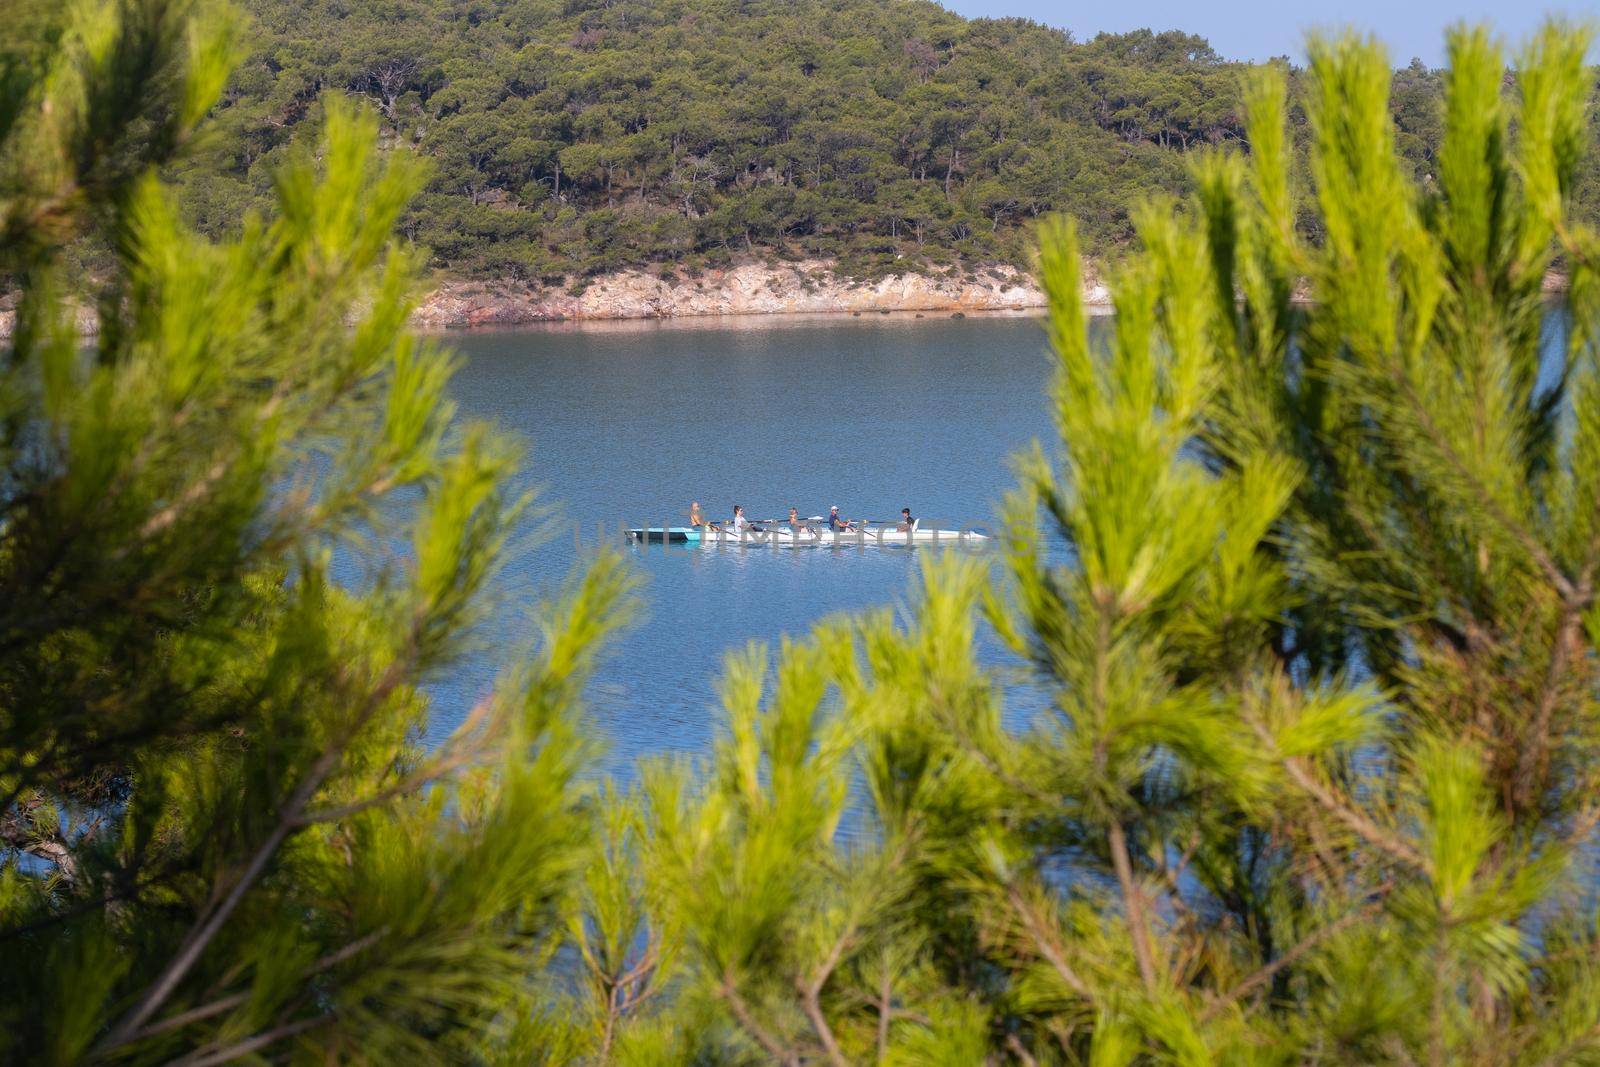 rowing team paddles on the tranquil sea by senkaya